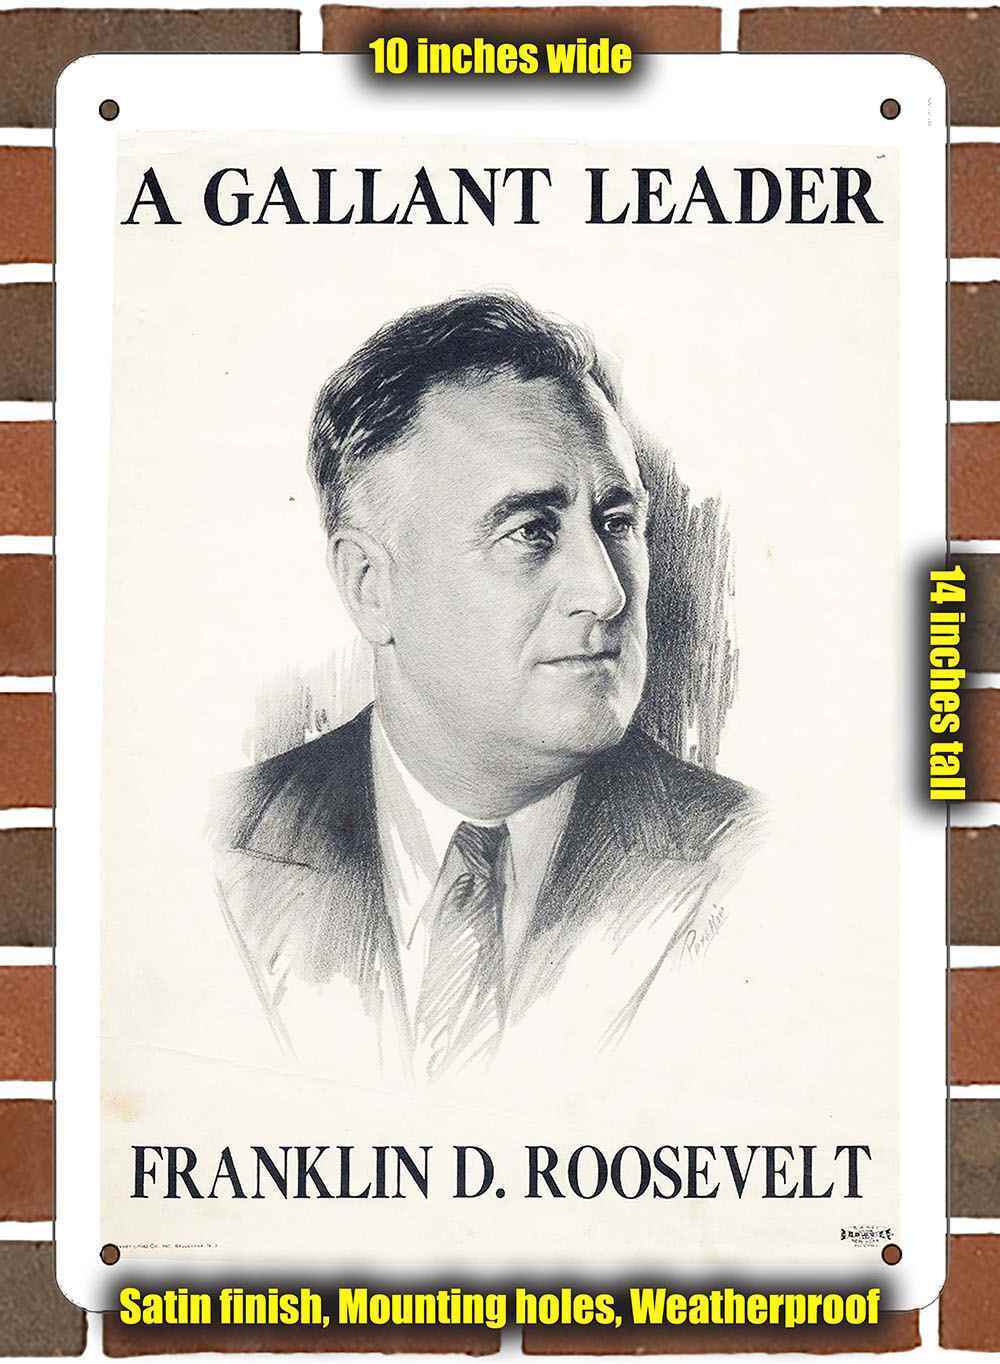 Metal Sign - 1936 Franklin Roosevelt Gallant Leader- 10x14 inches